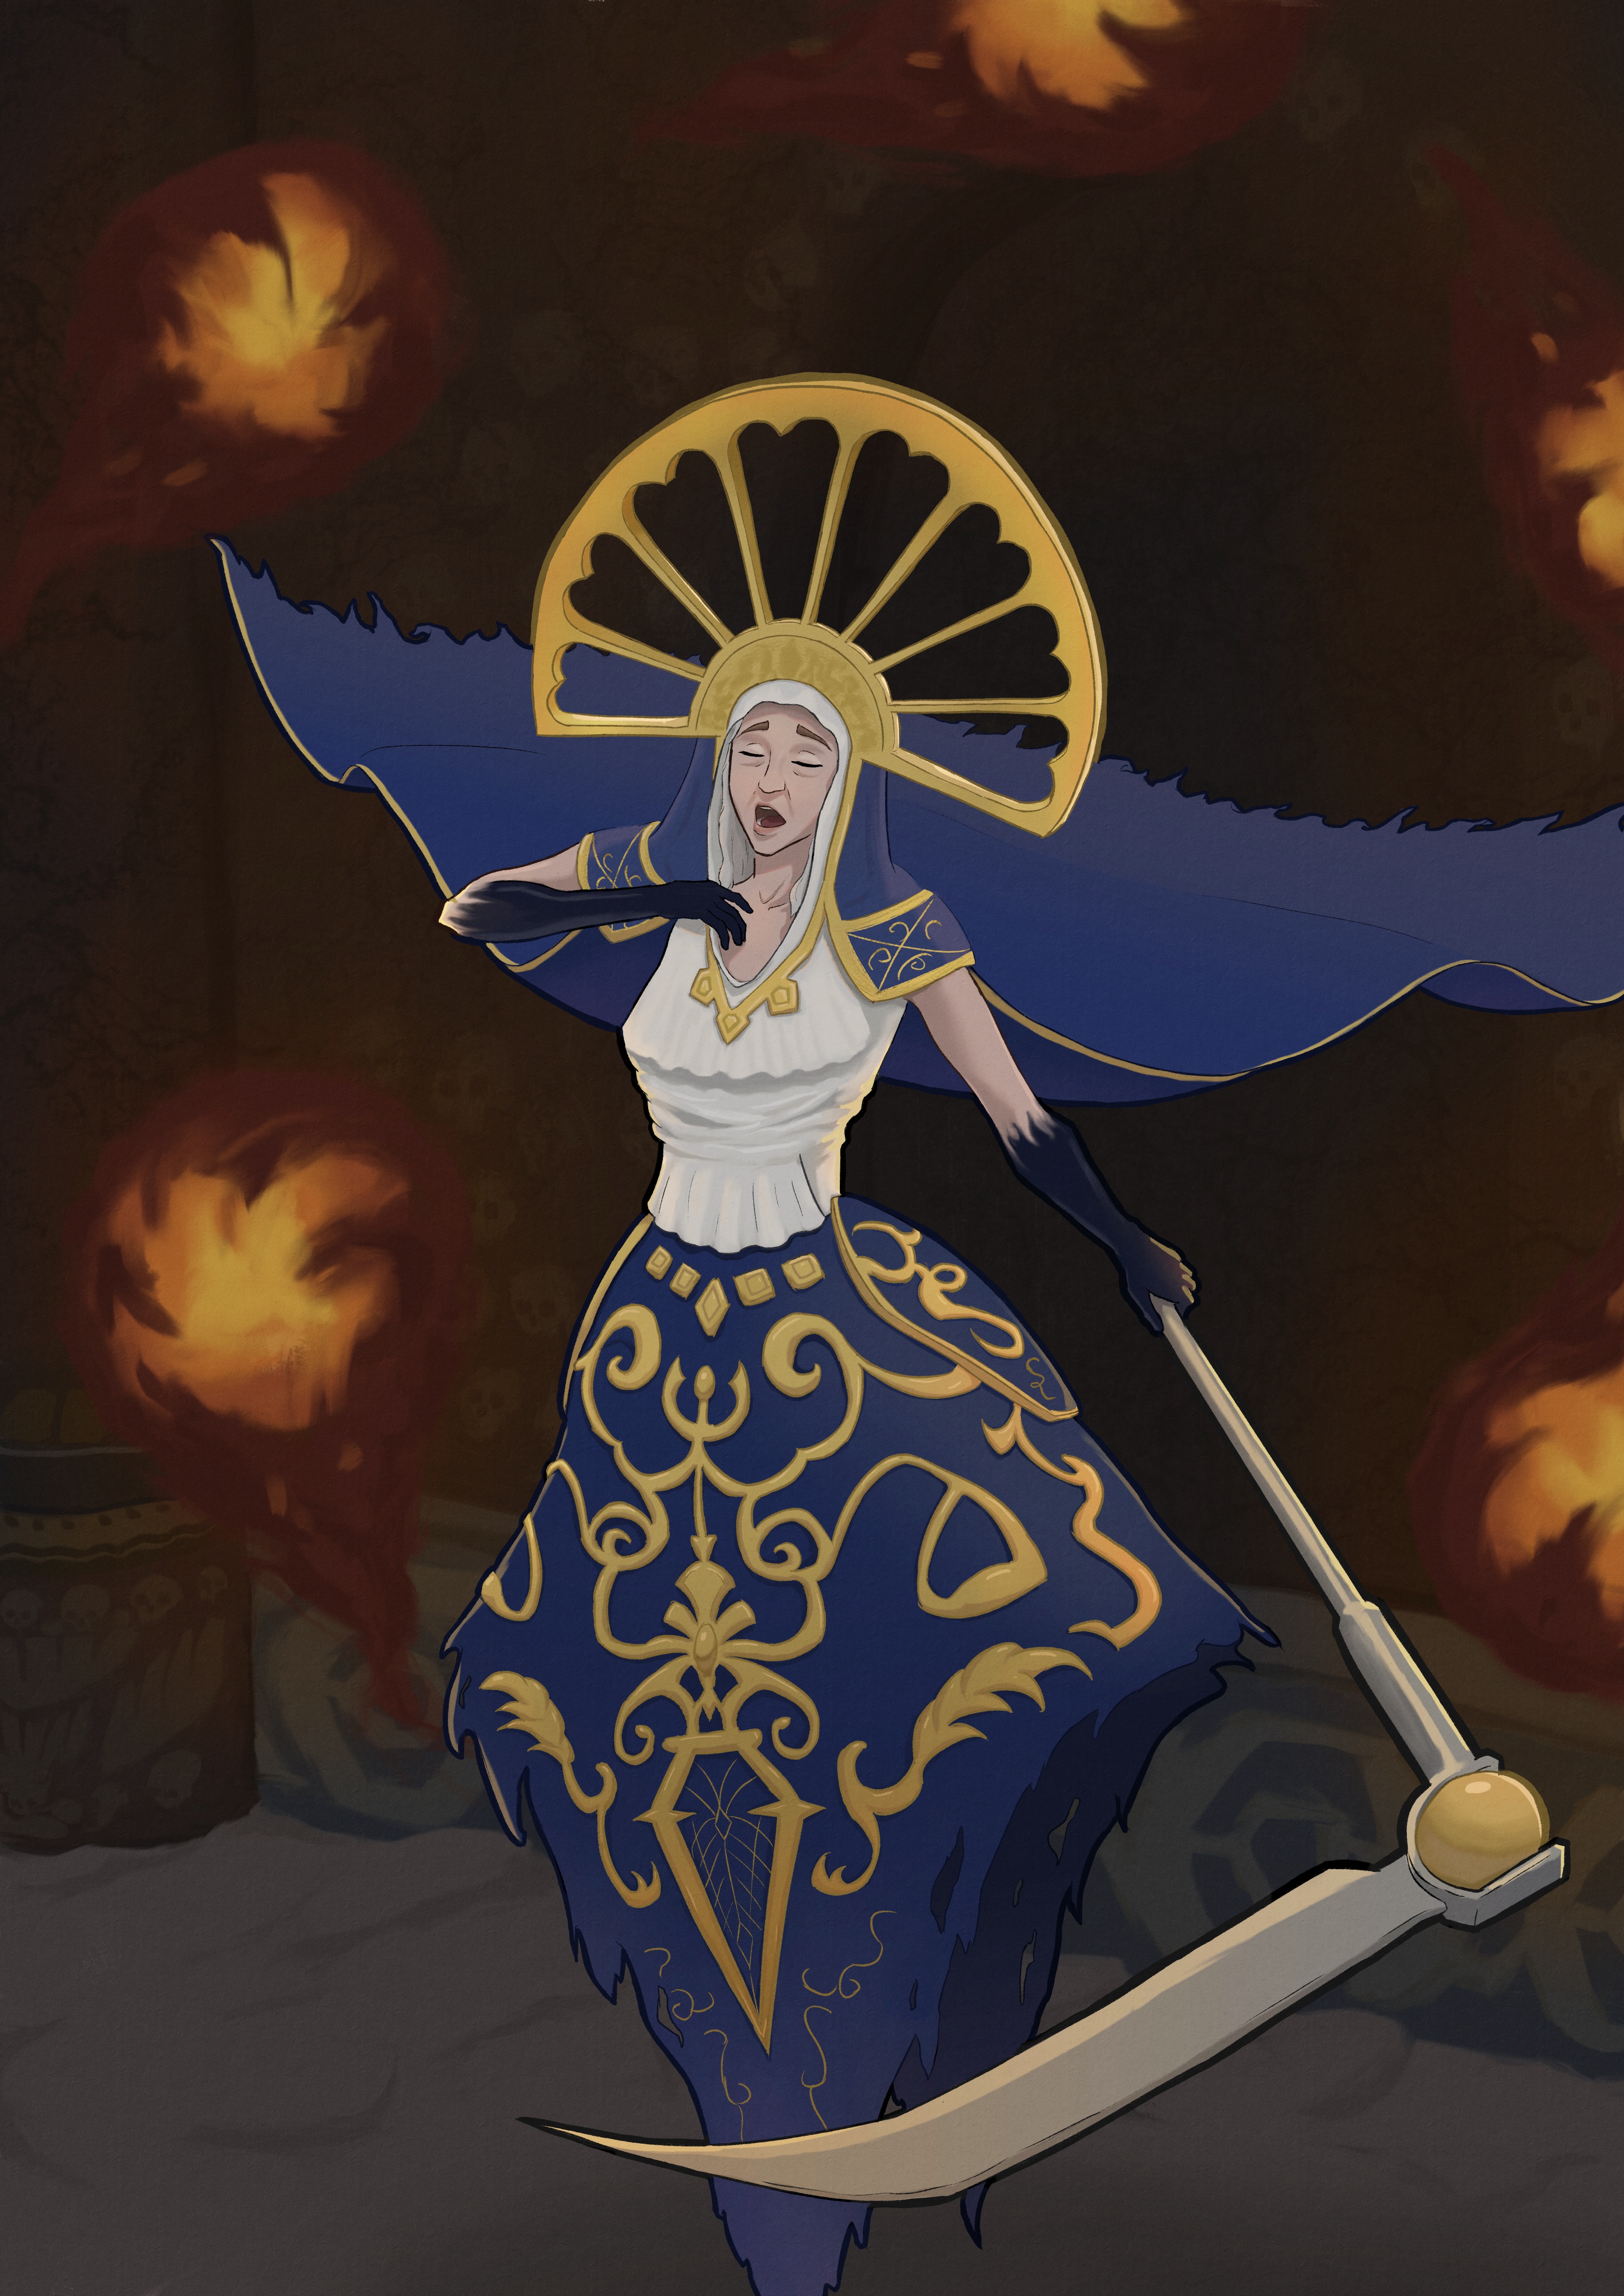 Digital painting depicting Isidora, Voice of the Dead from
the game Blasphemous. She's floating in the air with her cape billowing behind
her, singing with her eyes closed, while fireballs circle around her in the
background. 